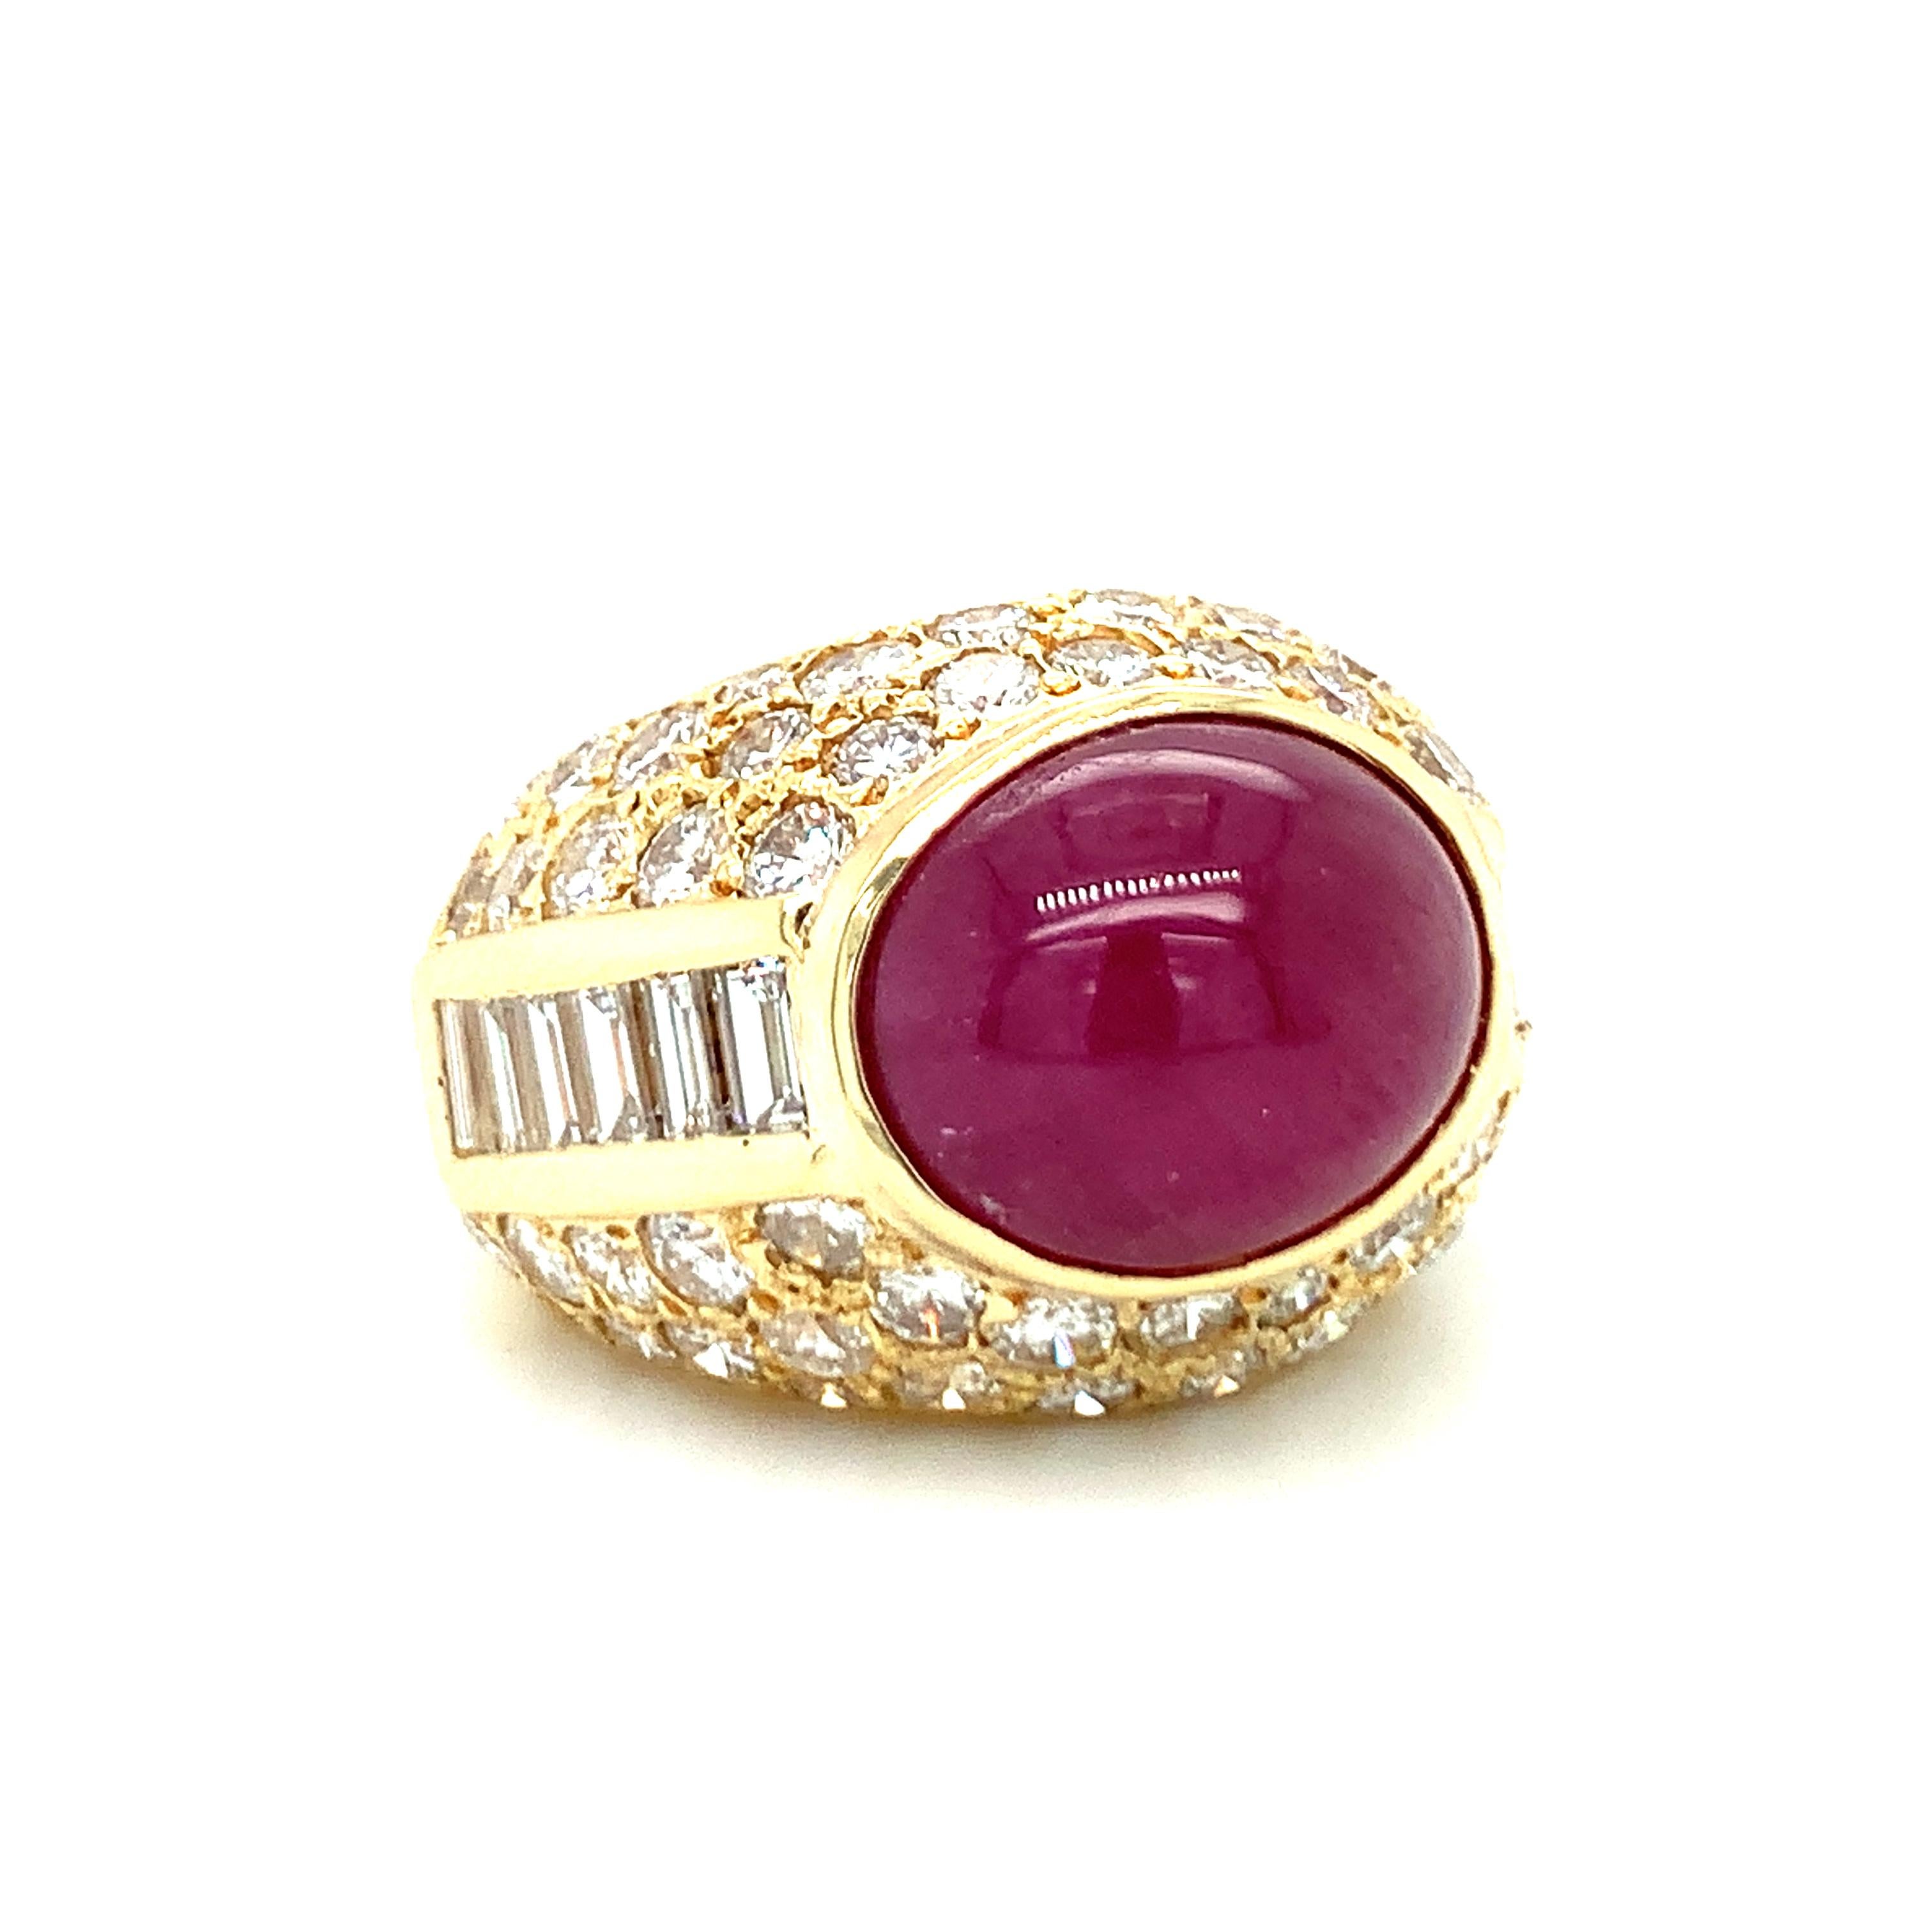 One ruby and diamond 18K yellow gold centering one bezel set, oval cabochon ruby weighing 10 ct. with GIA Report stating no heat treatment. Enhanced by seventy straight baguette and round brilliant cut diamonds totaling 3.45 ct. with G-H color and